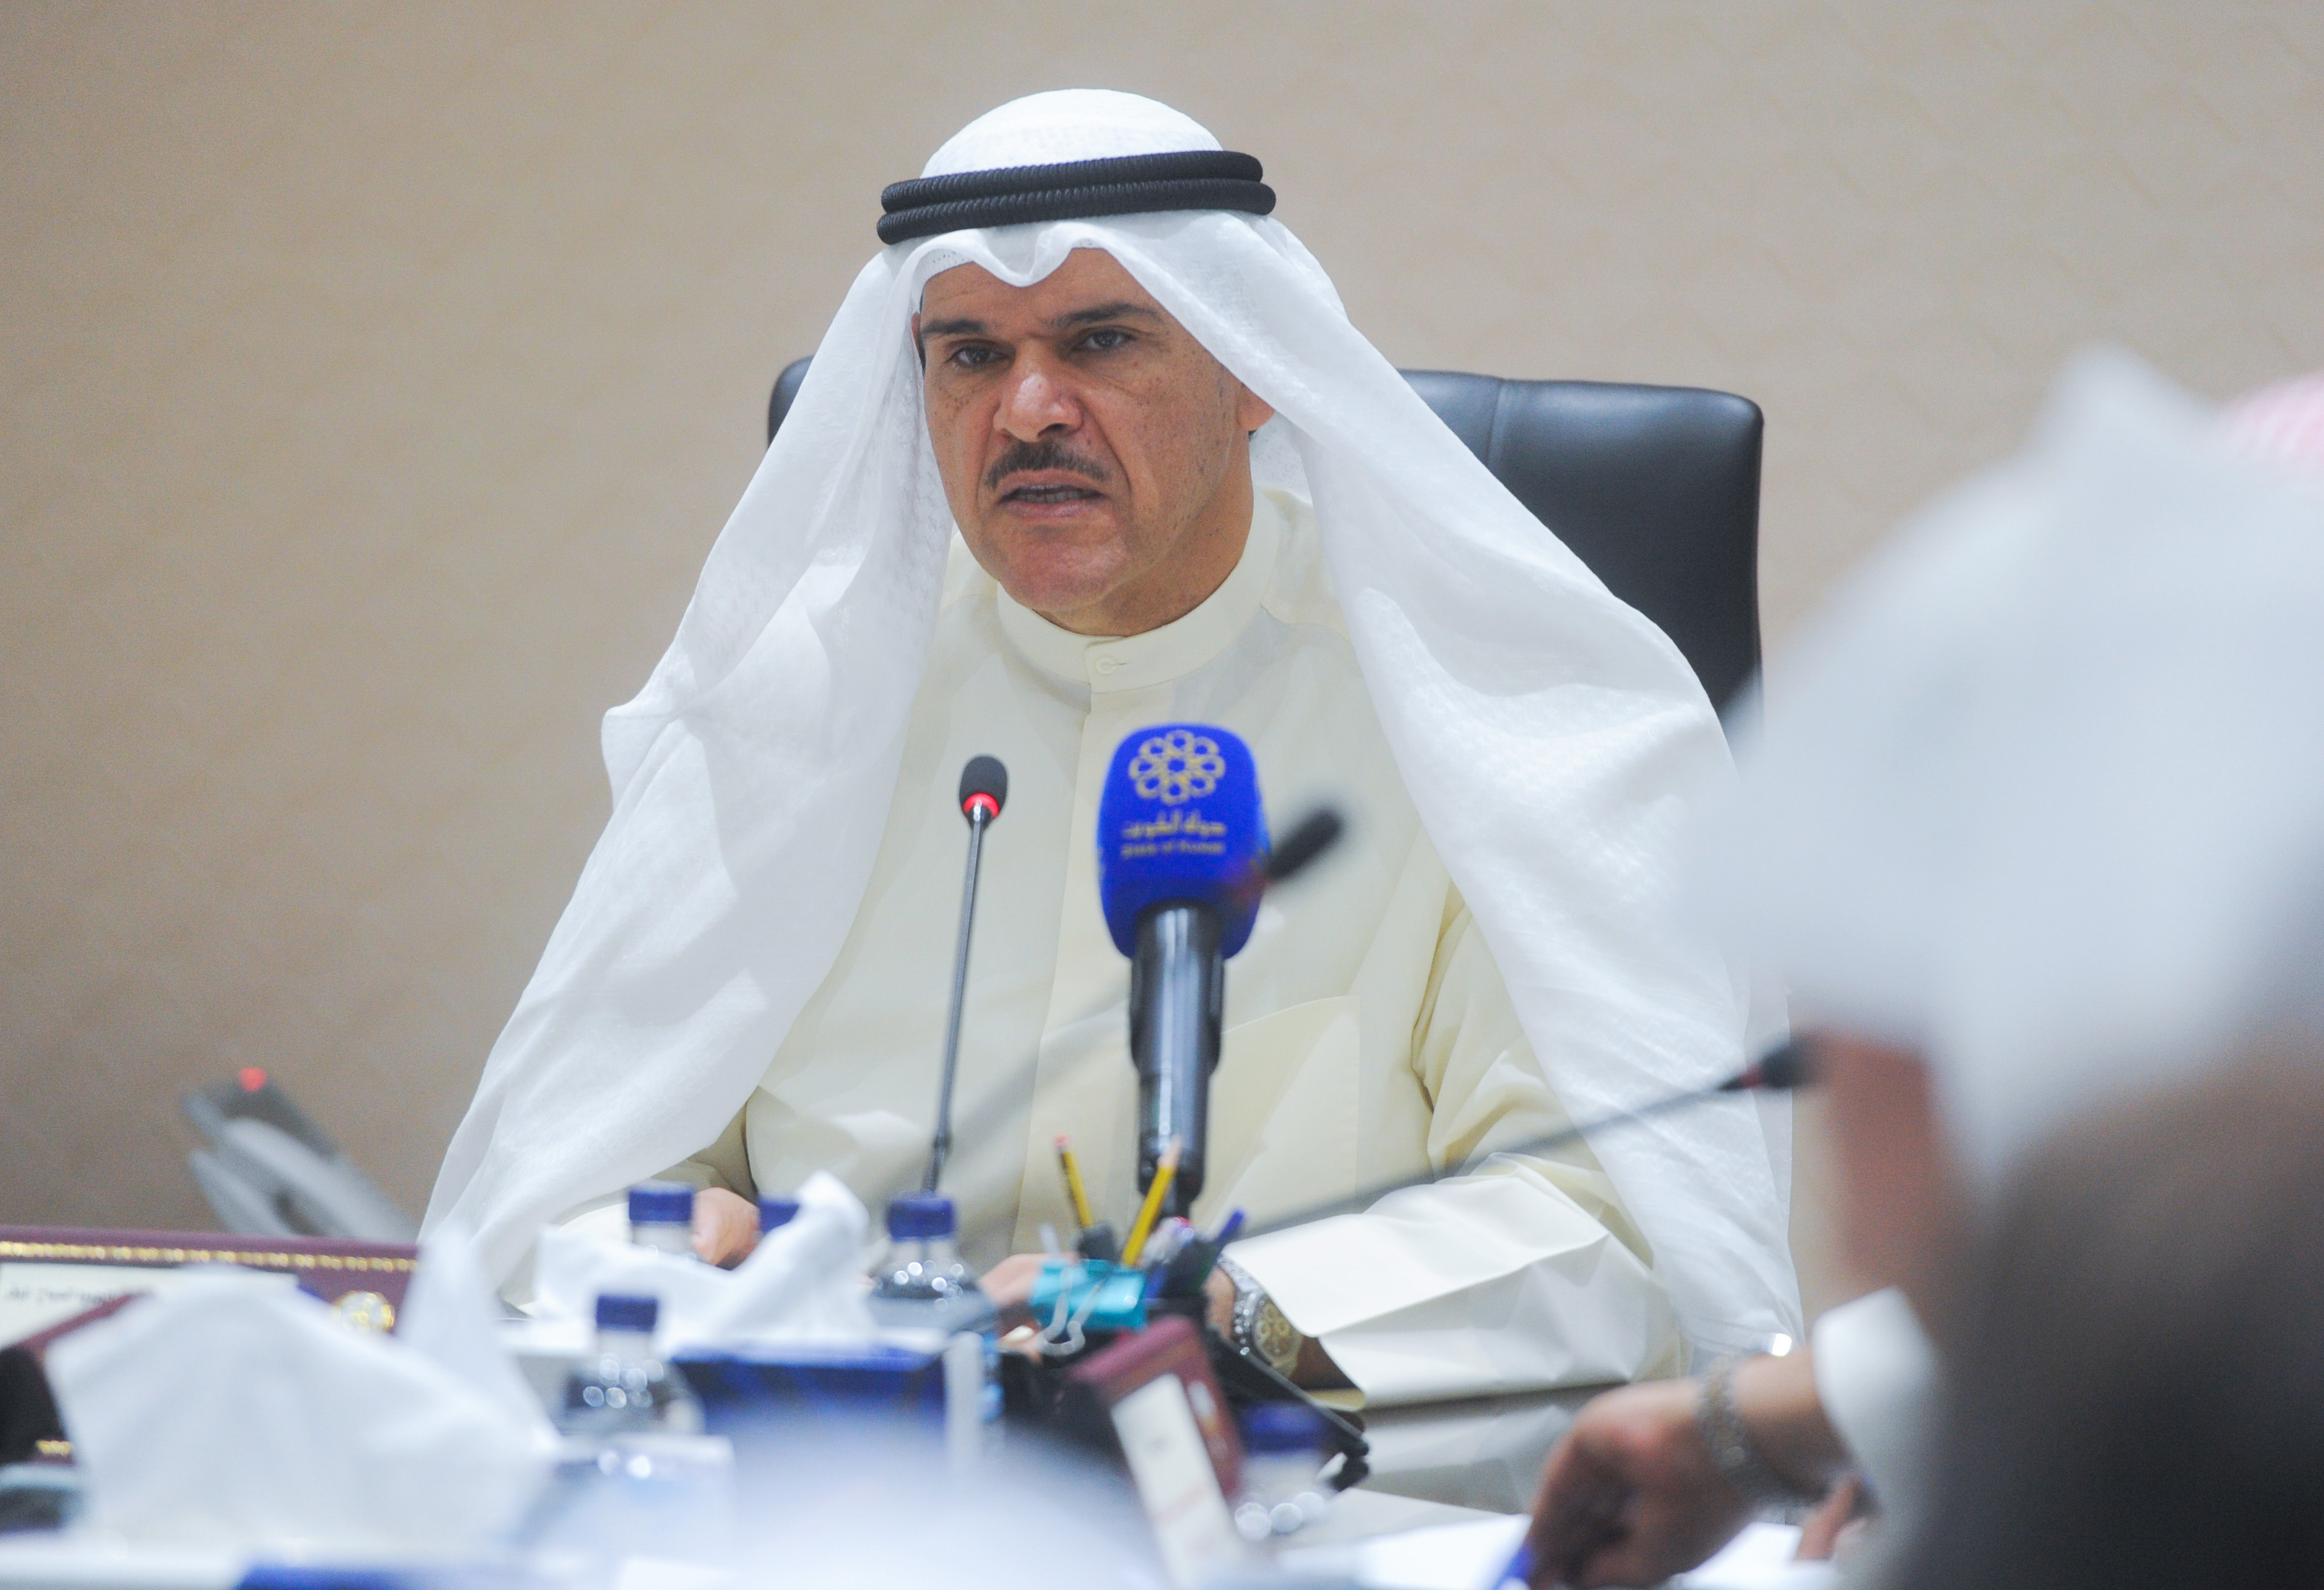 Minister of Information and Minister of State for Youth Affairs Sheikh Salman Sabah Al-Salem Al-Humoud Al-Sabah chairs a meeting by the consultative committee on the celebrations of Kuwait Capital of Islamic Culture 2016